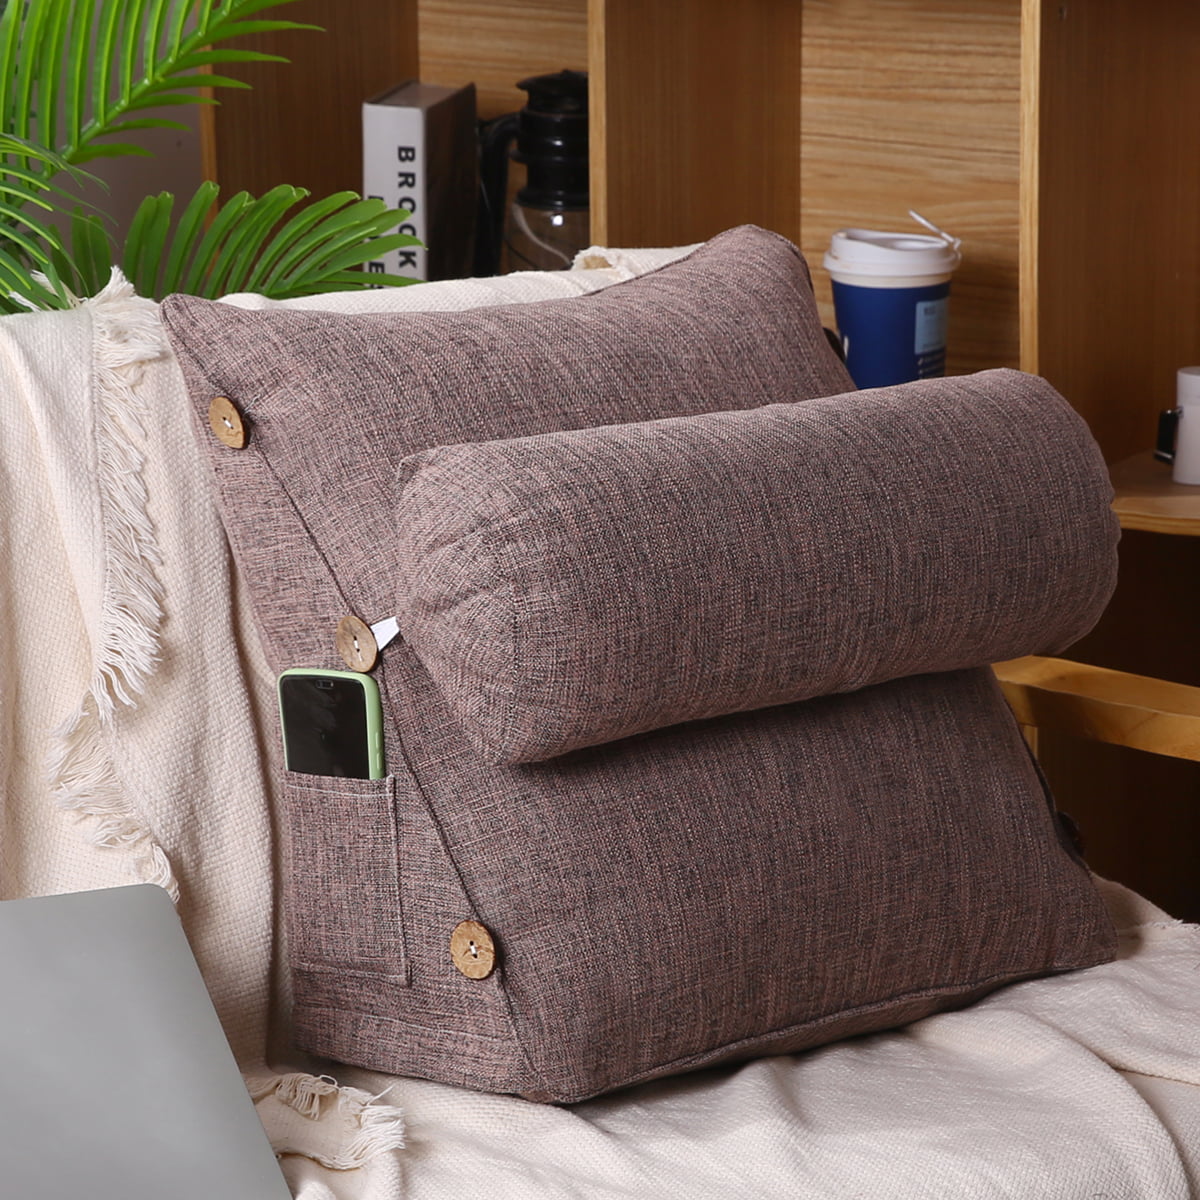 Lumbar Support color : A, Size : 45cm×50cm×22cm Bed And Sofa Wedge Pillow Perfect For Reading And Watching TV Perfect Sofa Cushion Adjustable Wedge Pillow Holder 